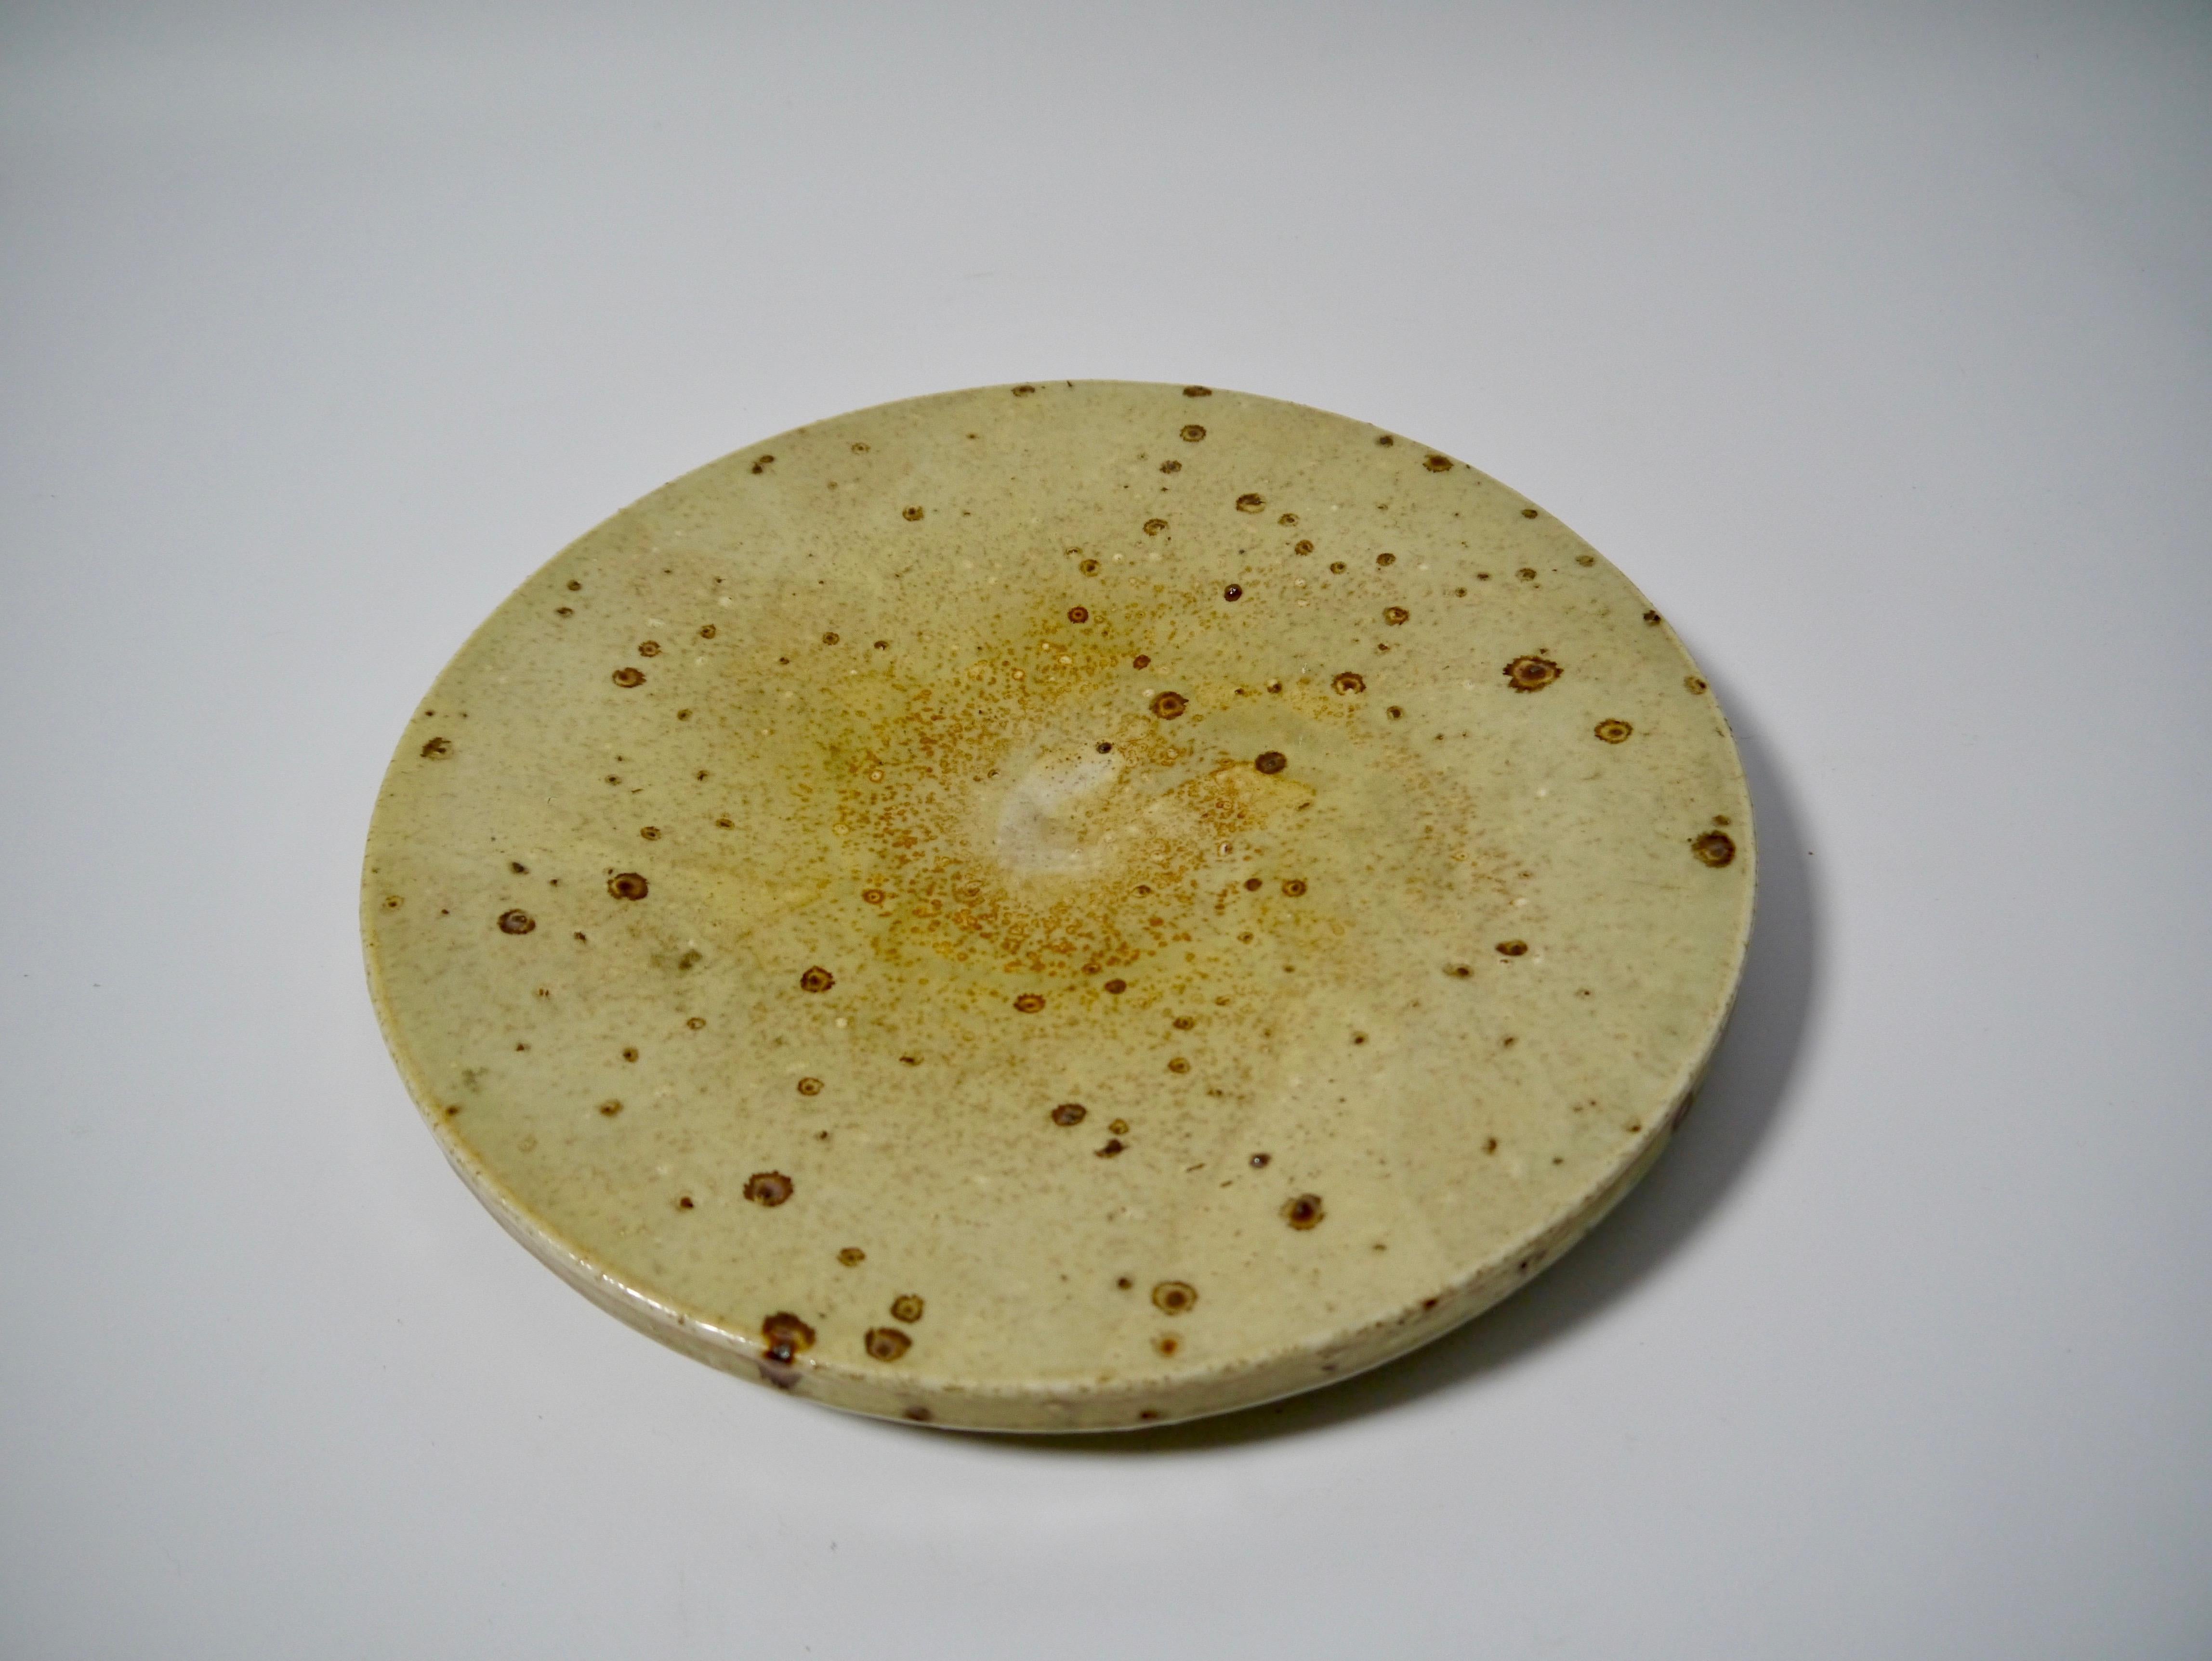 Shallow serving plate / dish / centerpiece designed by Marianne Westman for Rörstrand, Sweden, 1960s. Ceramic in an earthy colored, wabi-sabi raw glaze.